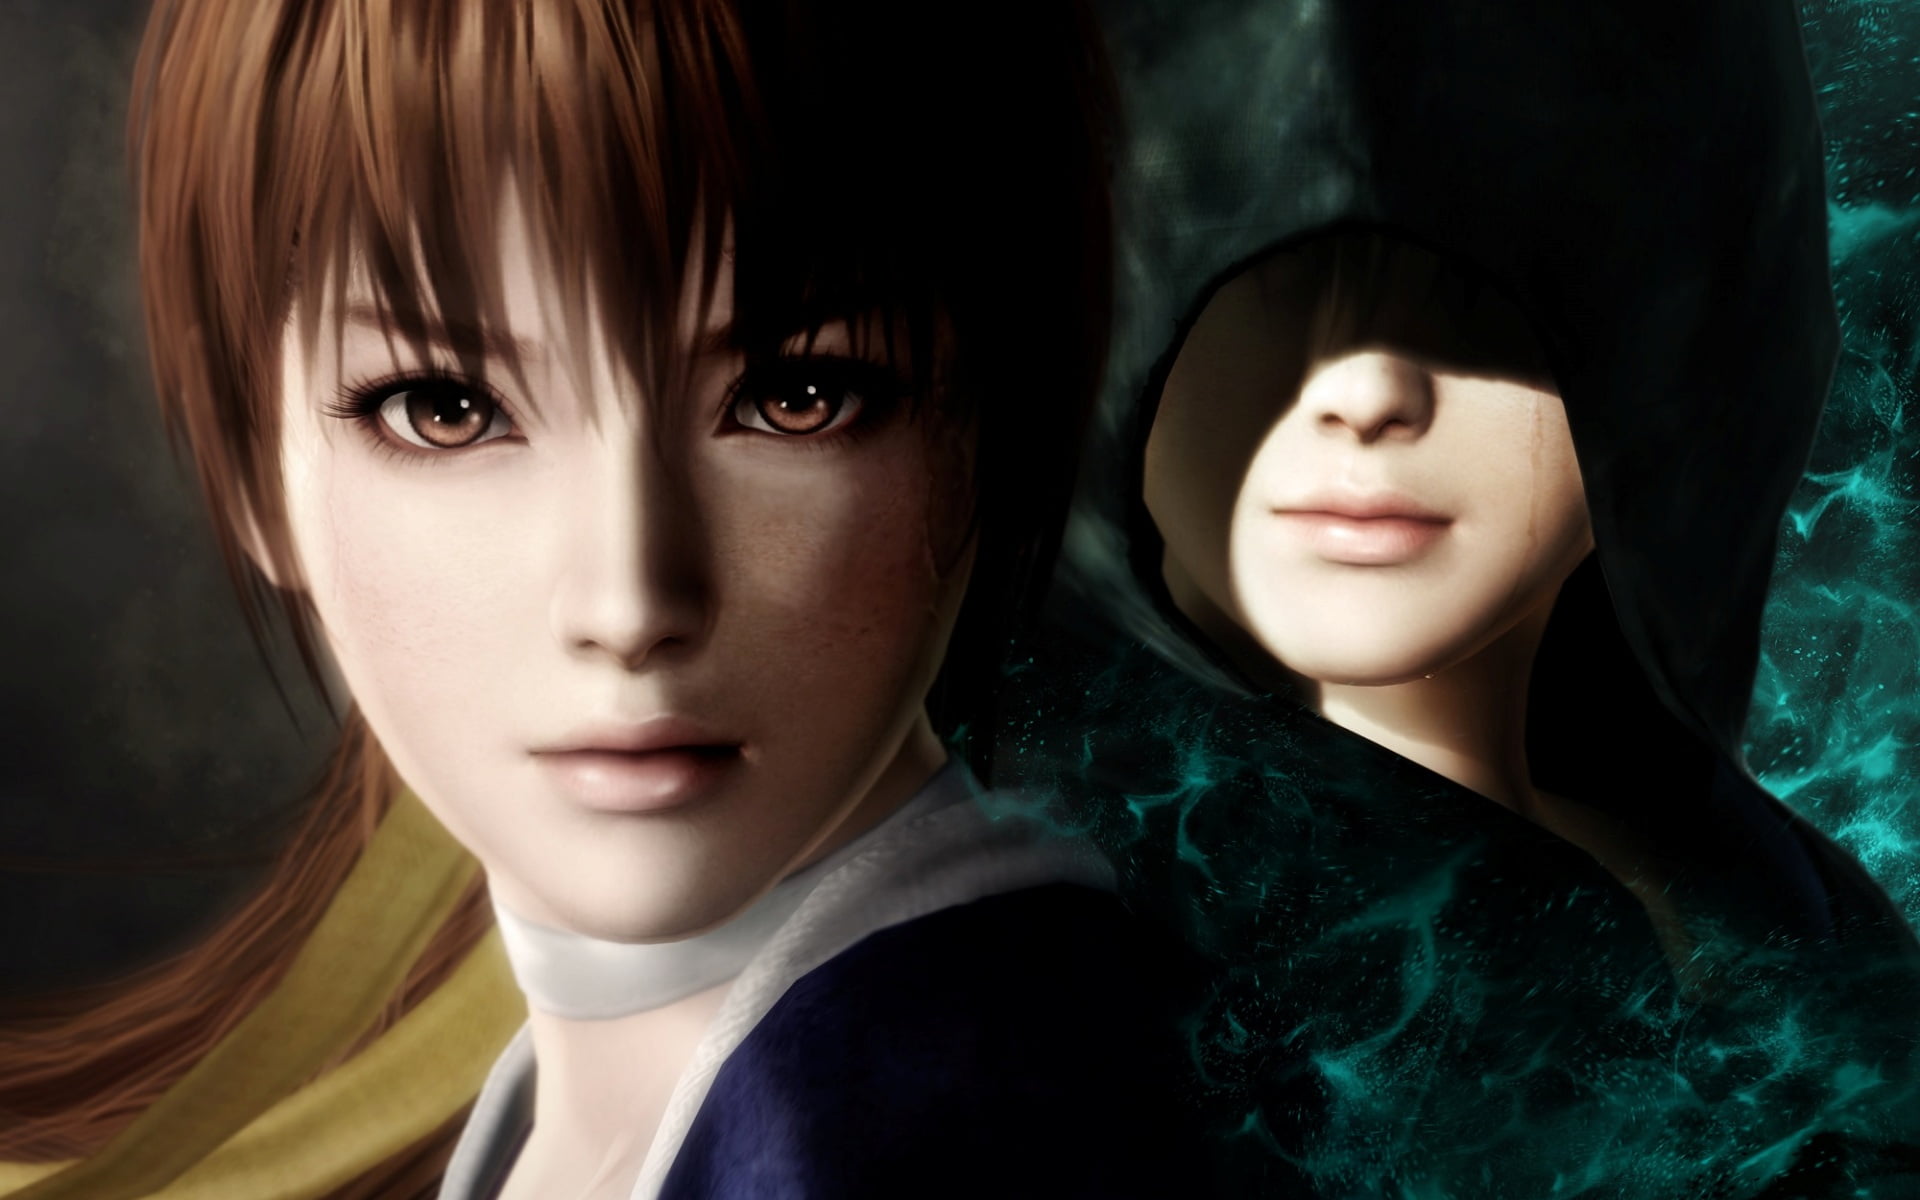 Dead Or Alive 5: Last Round 2015, brown haired female illustration